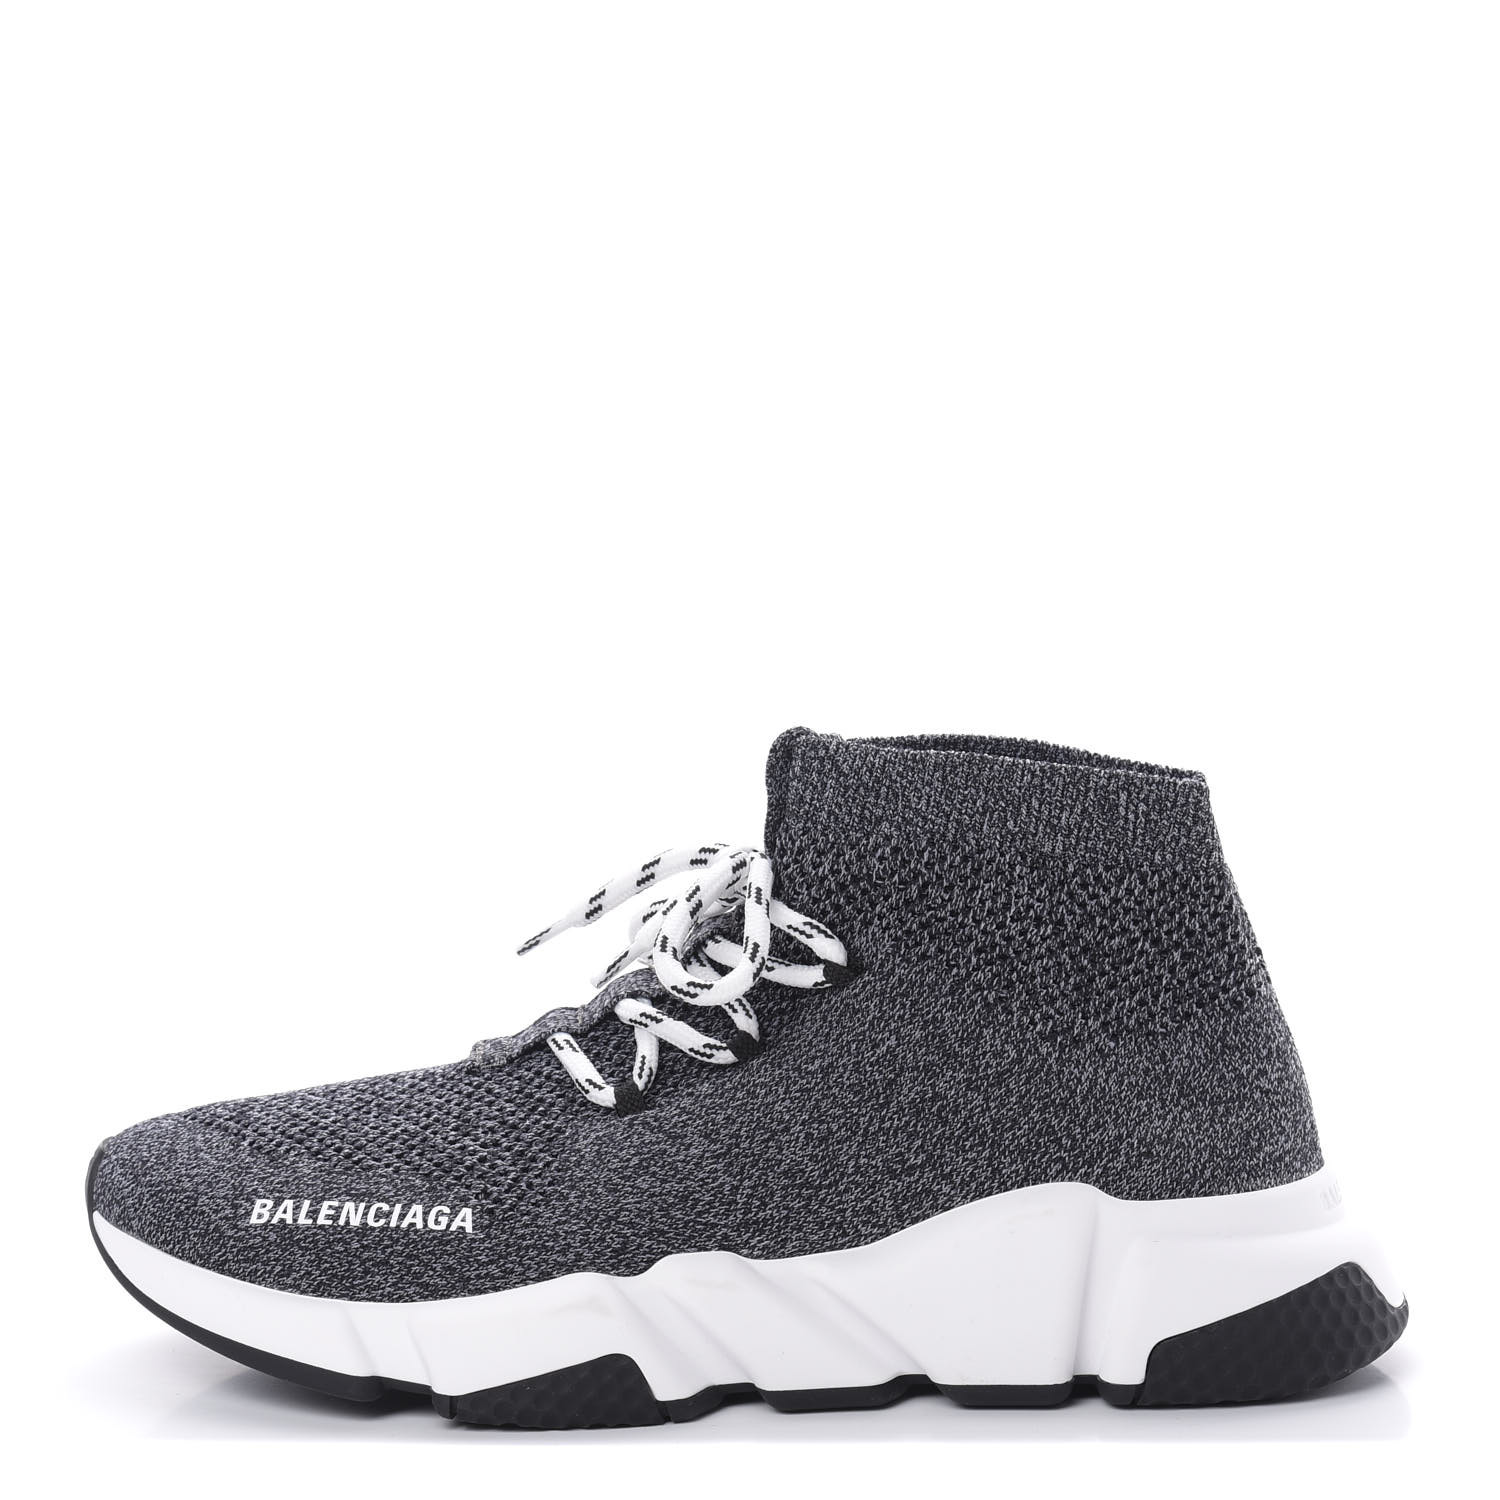 BALENCIAGA Neoprene Knit Womens Speed Trainers Lace Up Sneakers 40 ...